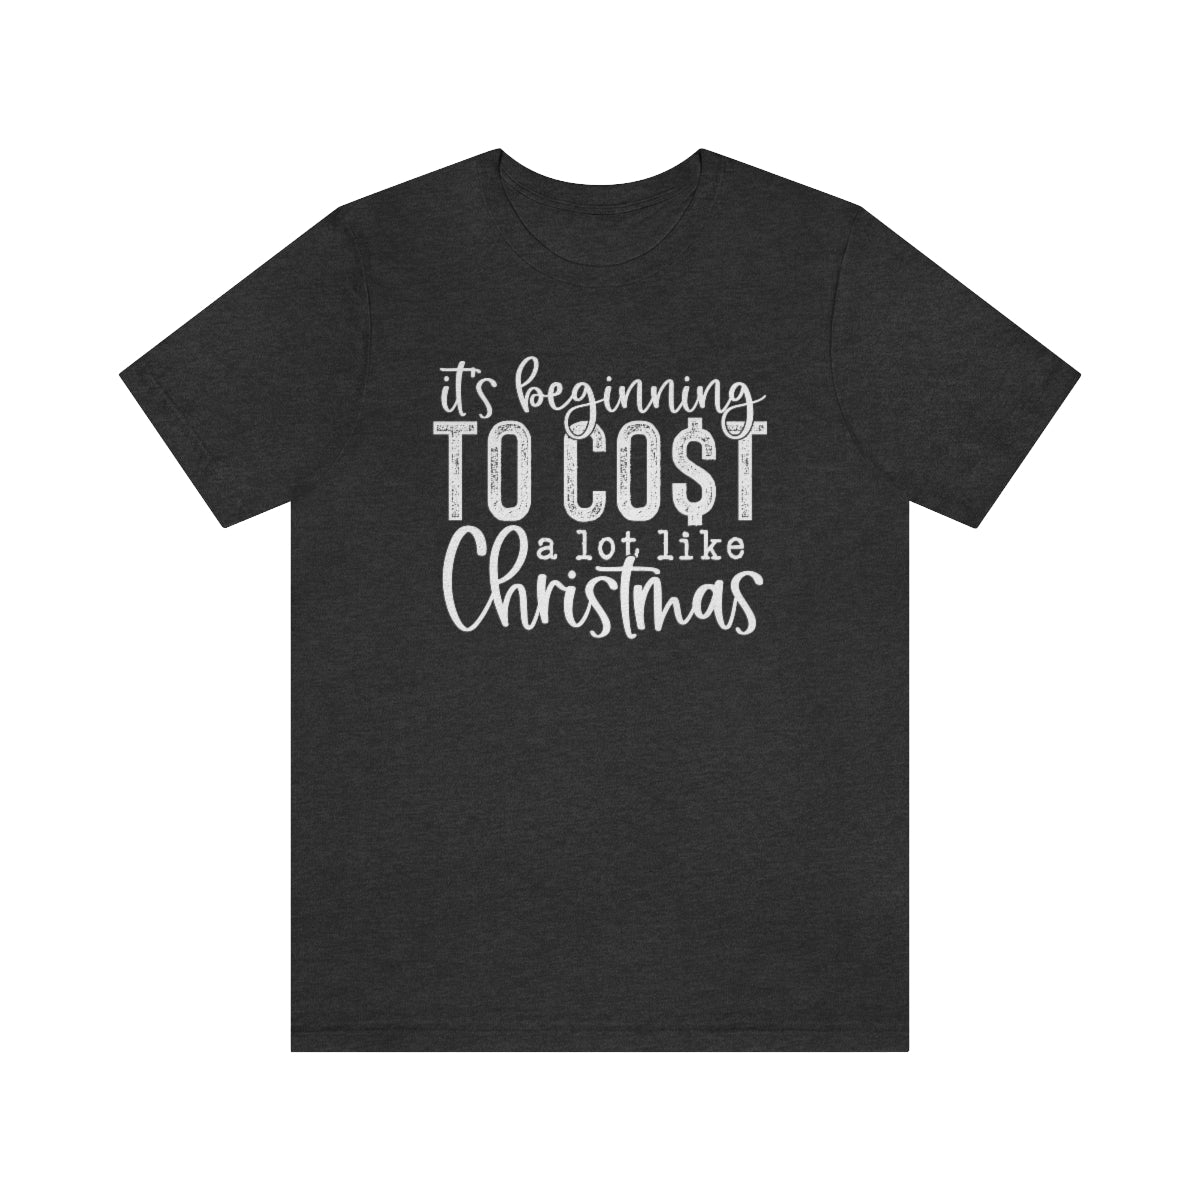 It's Beginning to Cost a Lot Like Christmas Shirt